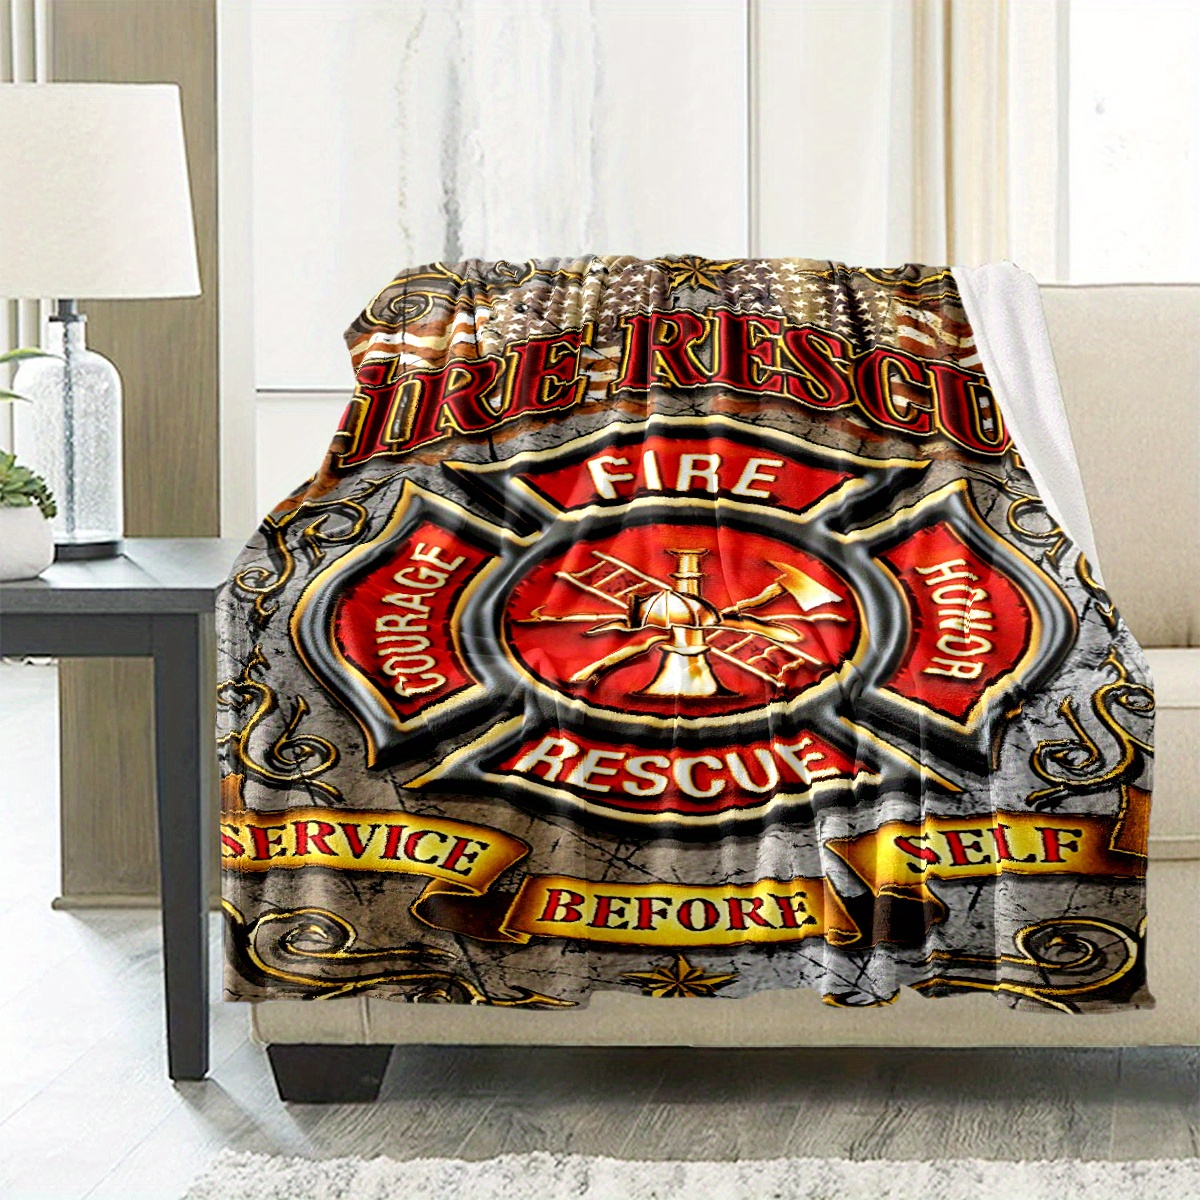 

Firefighter-themed Polyester Flannel Blanket - Soft, Cozy, And Warm For Couch, Bed, Sofa, And Office - And Courage Fire Rescue Design - Durable Chair Mat With Skus For Larger Areas